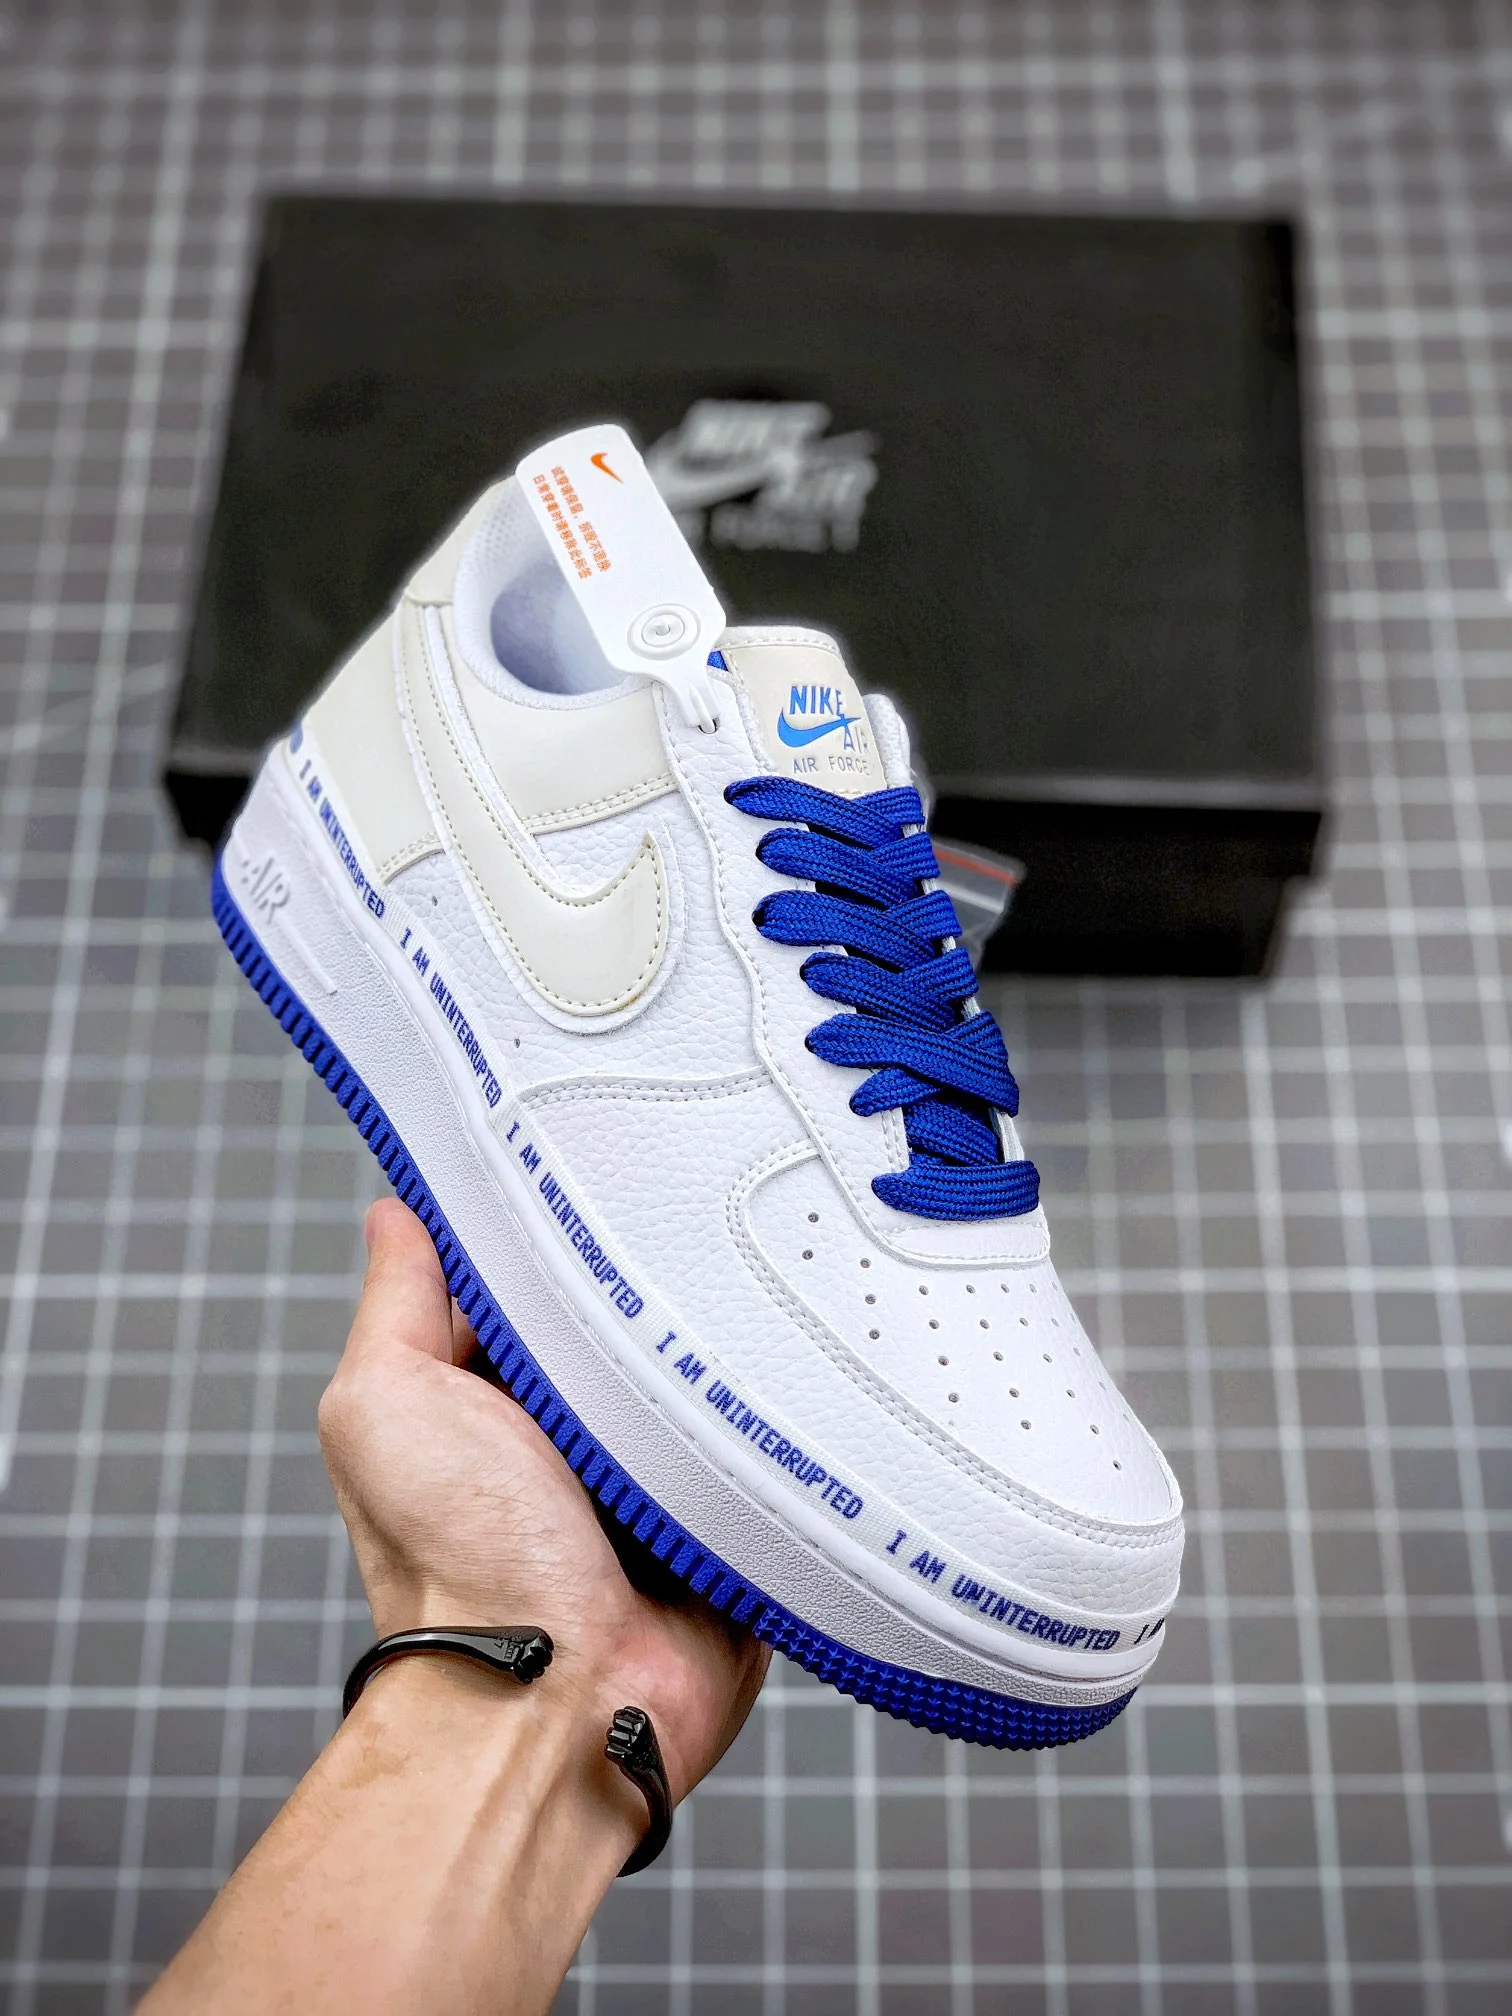 Uninterrupted x Nike Air Force 1 White Lapis Blue For Sale